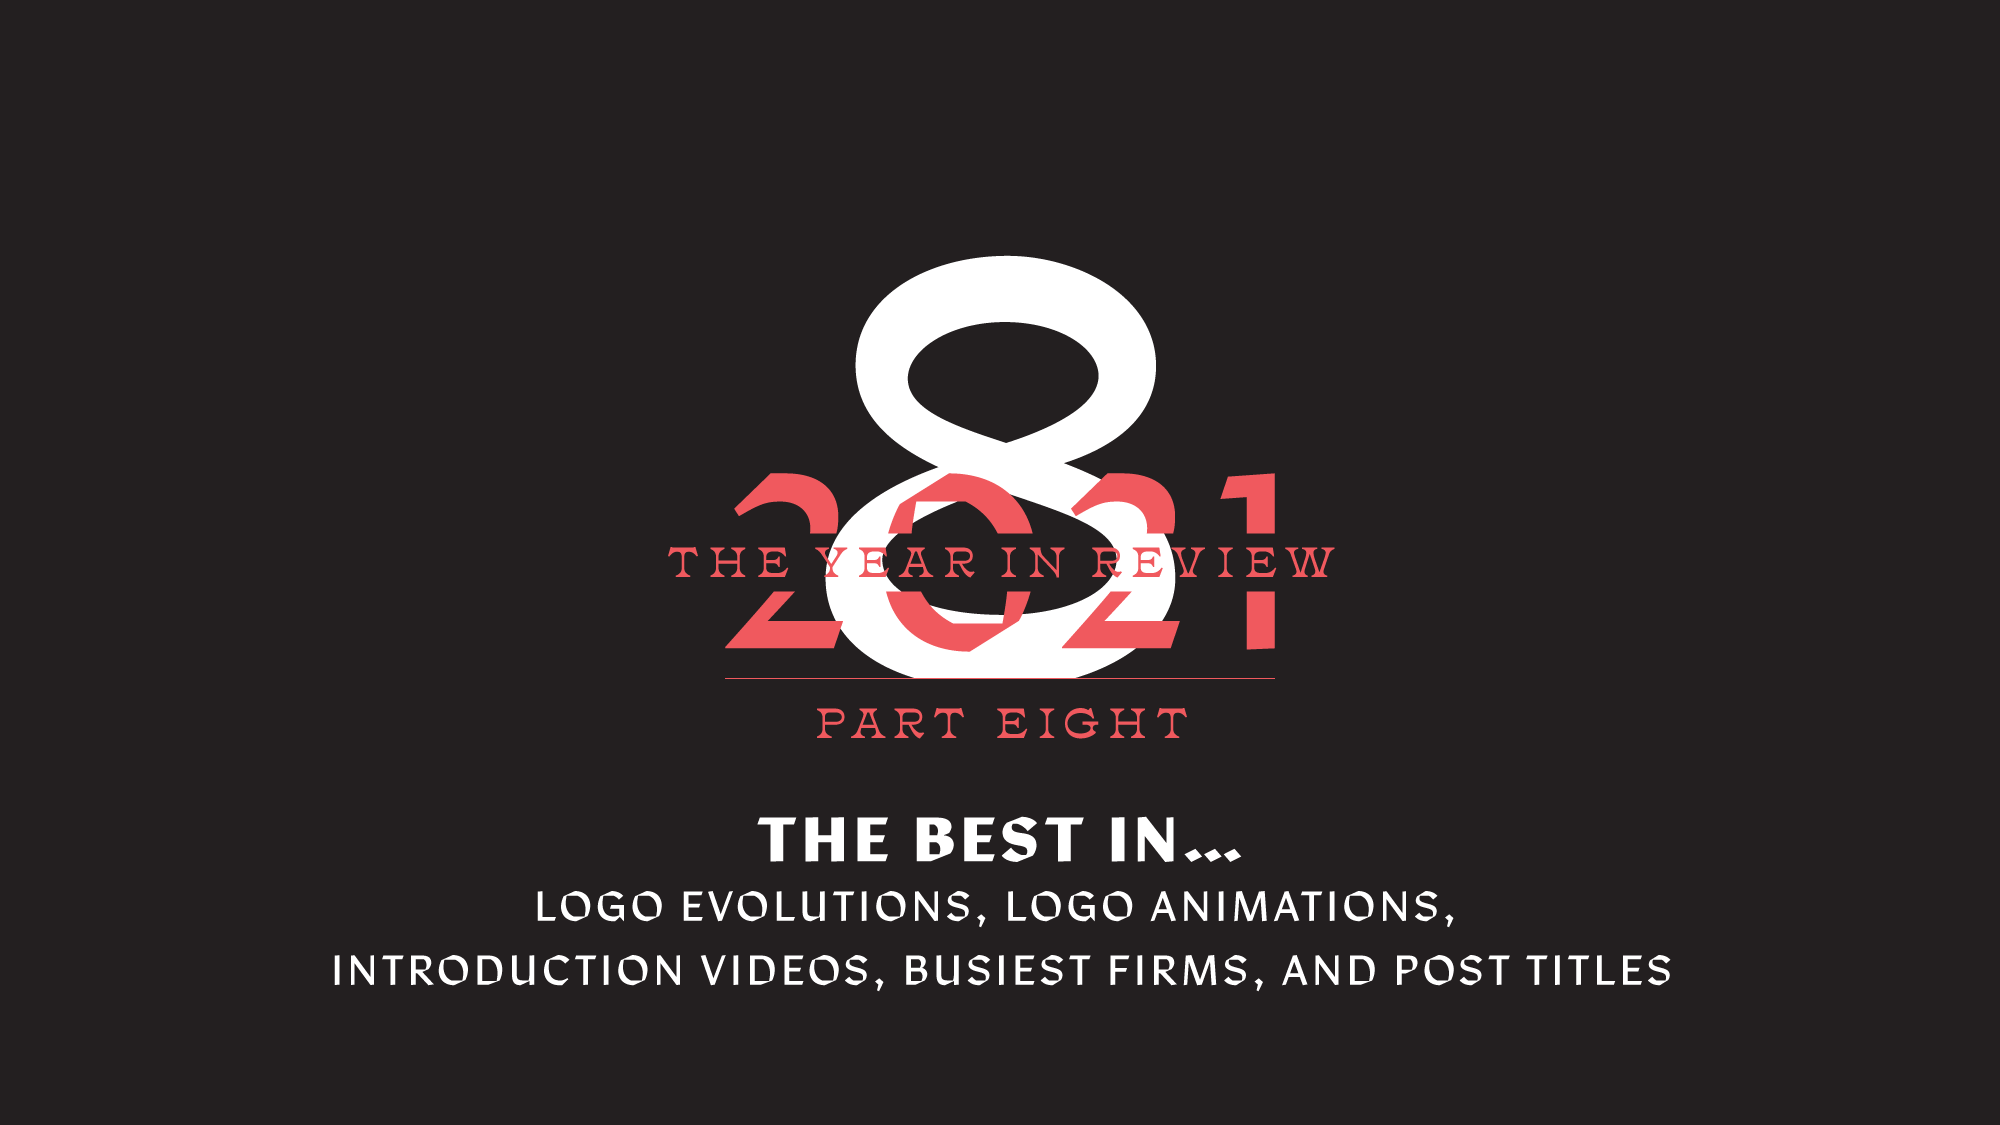 The Year in Review Part 8: The Best in Logo Evolutions, Logo Animations, Introduction Videos, Busiest Firms, and Post Titles